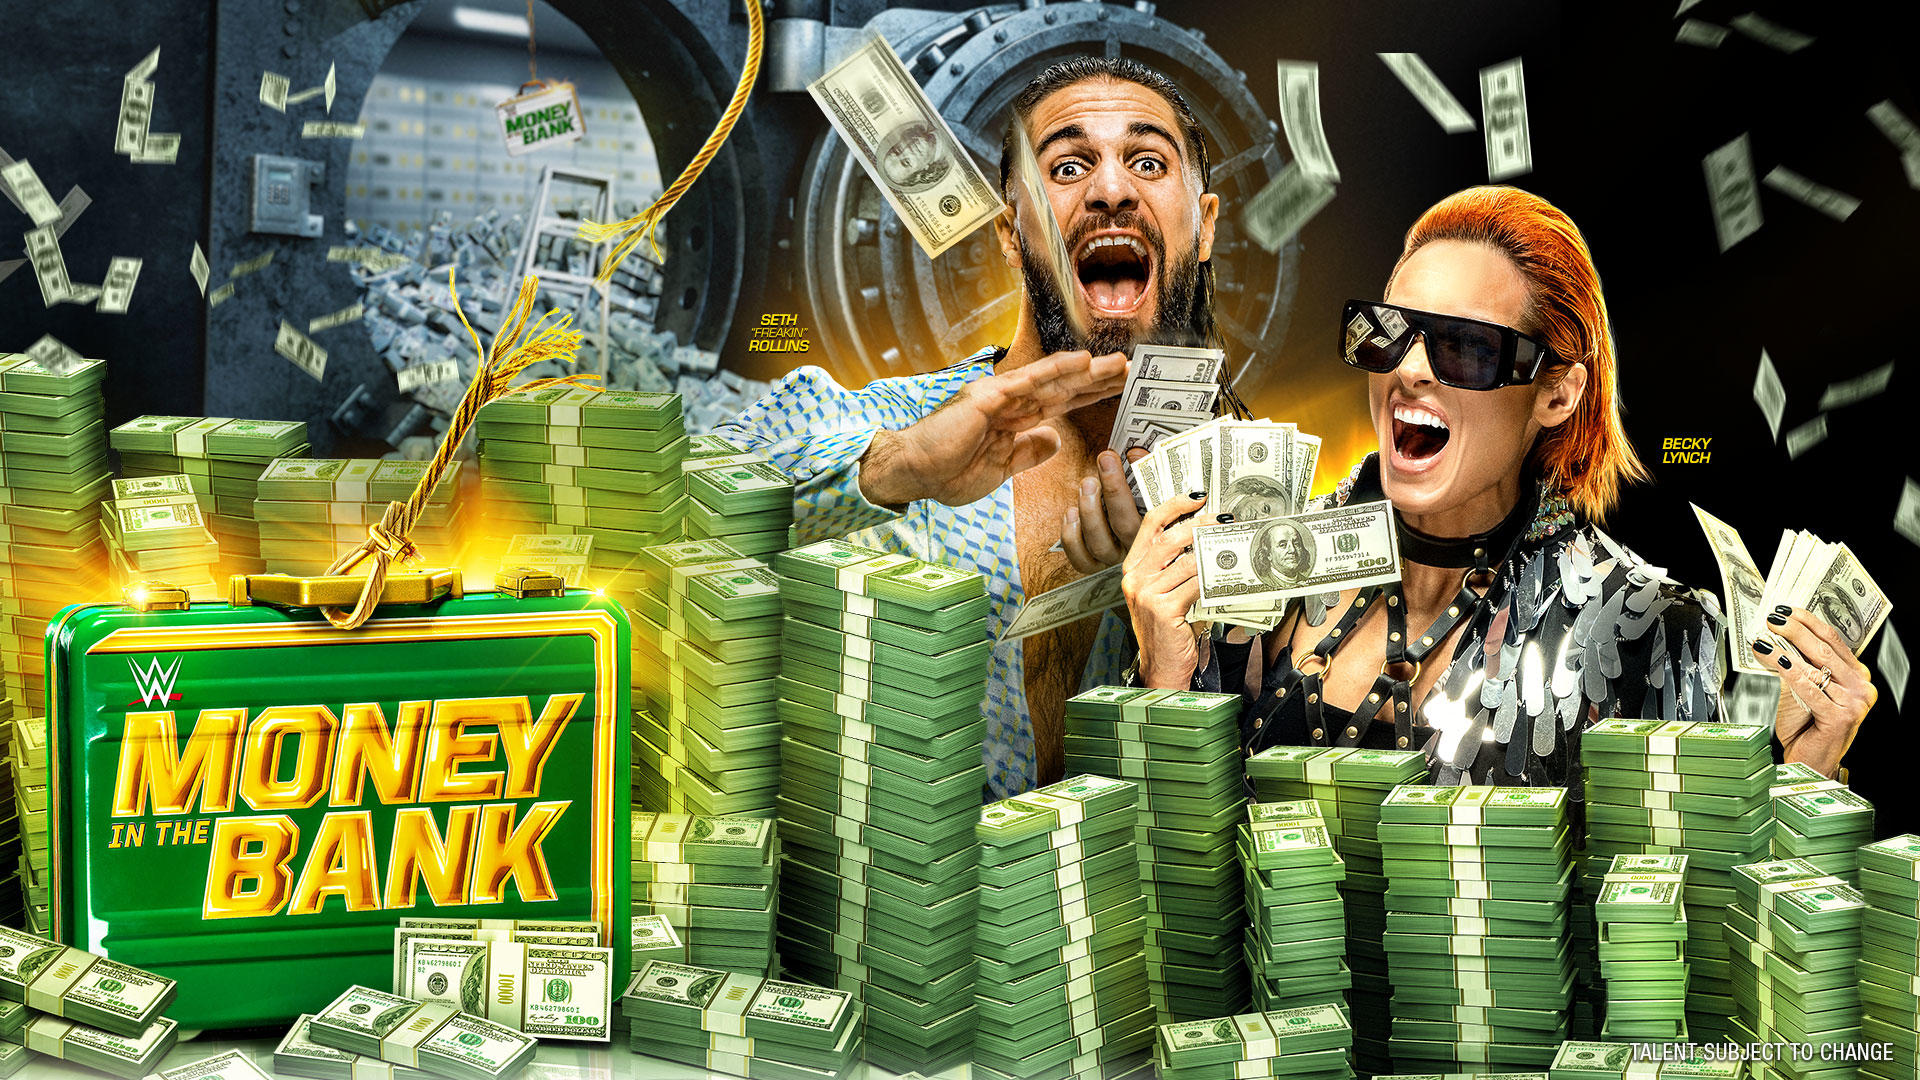 WWE Money in the Bank 2022: Match Card, Date, Time and Location: All you need to know